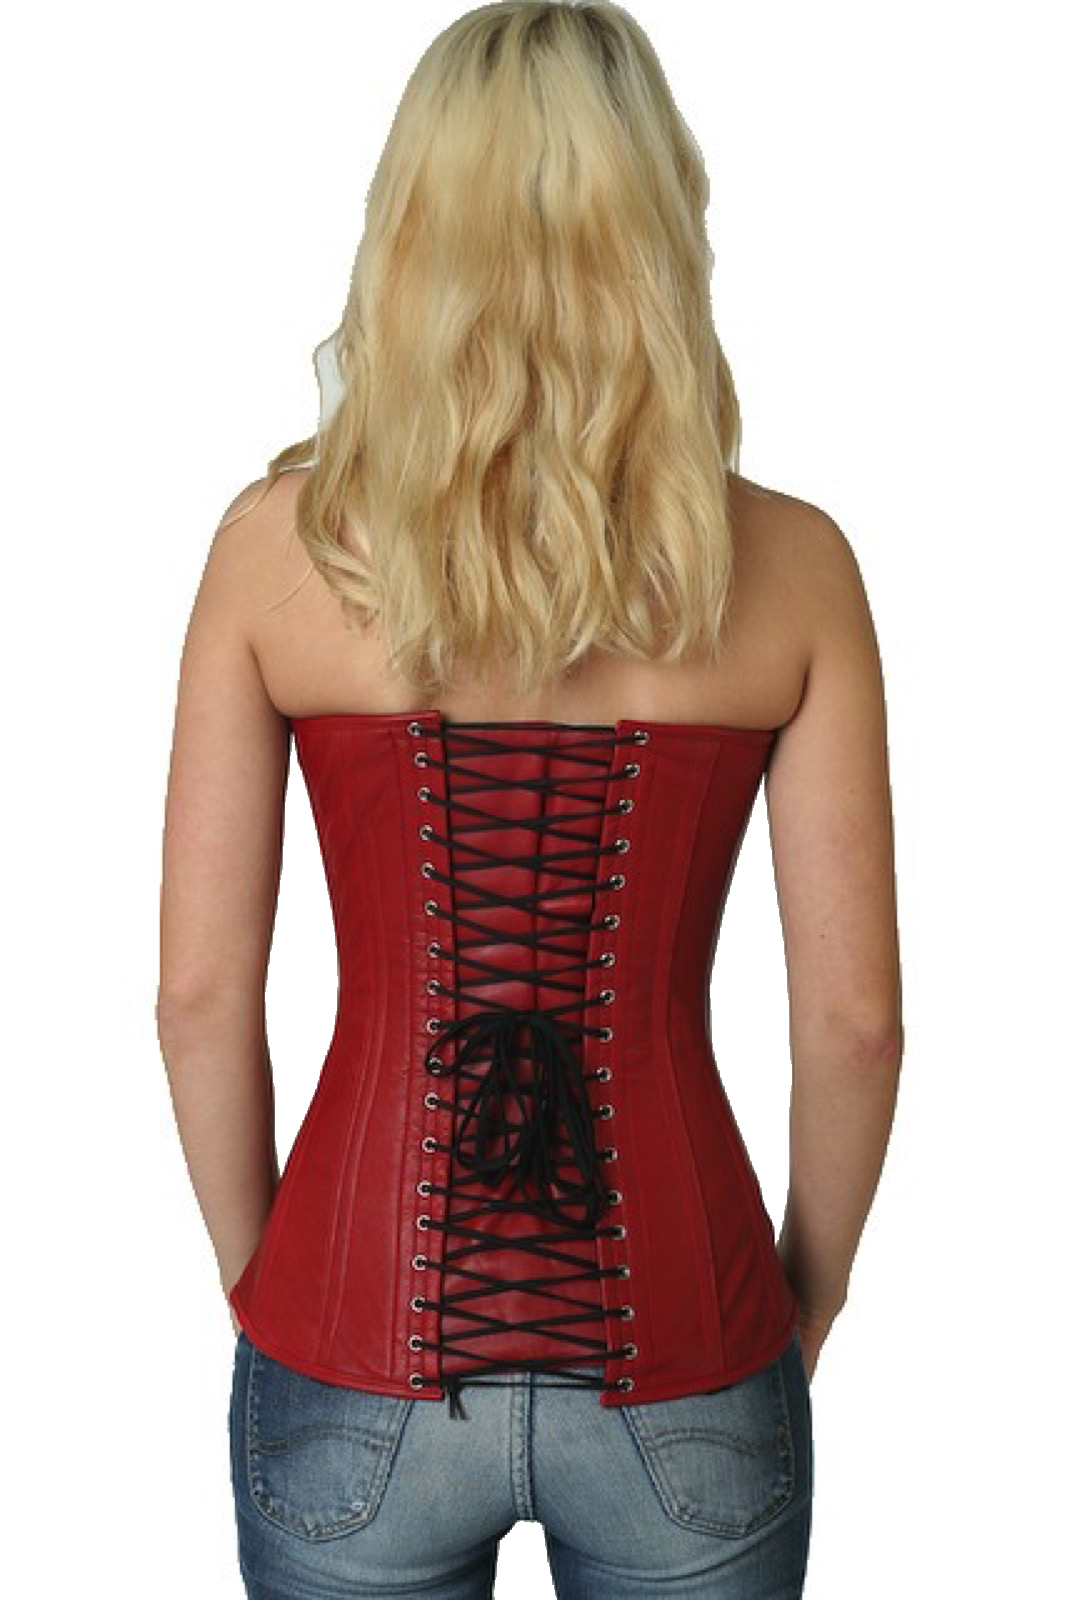 Corset red leather overbust ly23